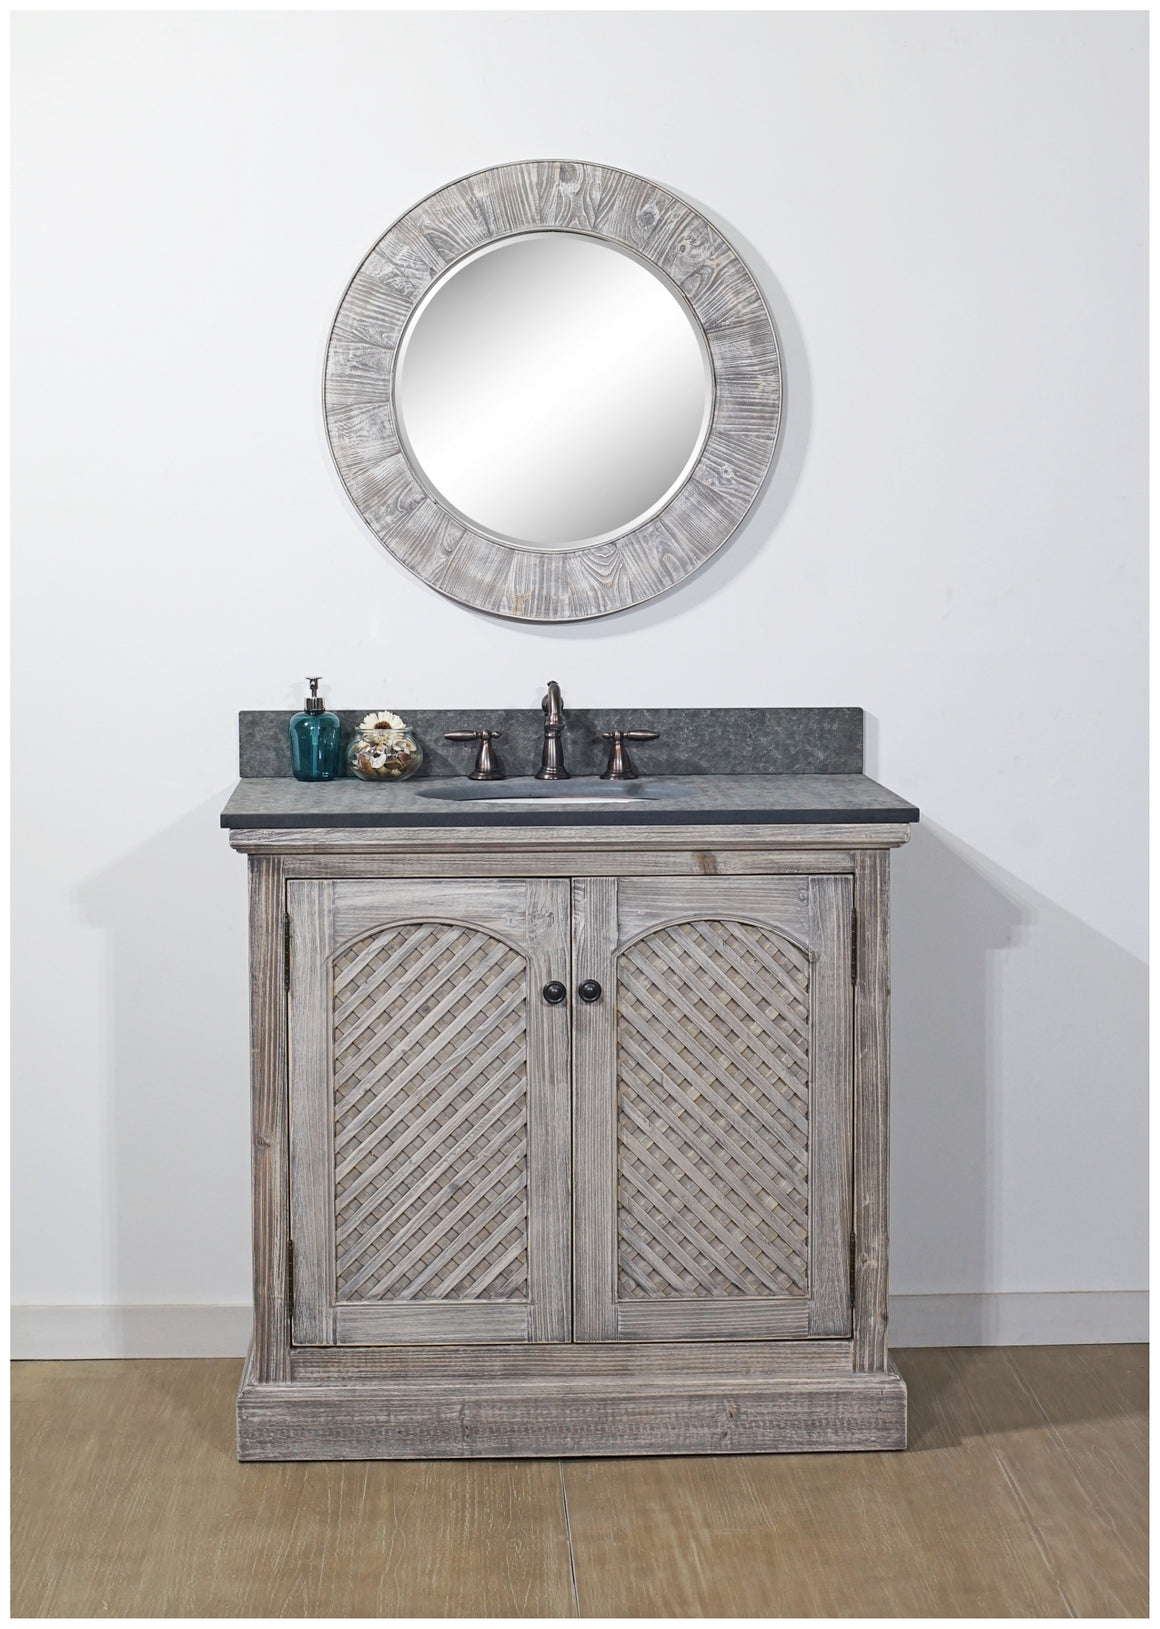 36" RUSTIC SOLID FIR SINGLE SINK VANITY IN GREY DRIFTWOOD WITH POLISHED TEXTURED SURFACE GRANITE TOP-NO FAUCET